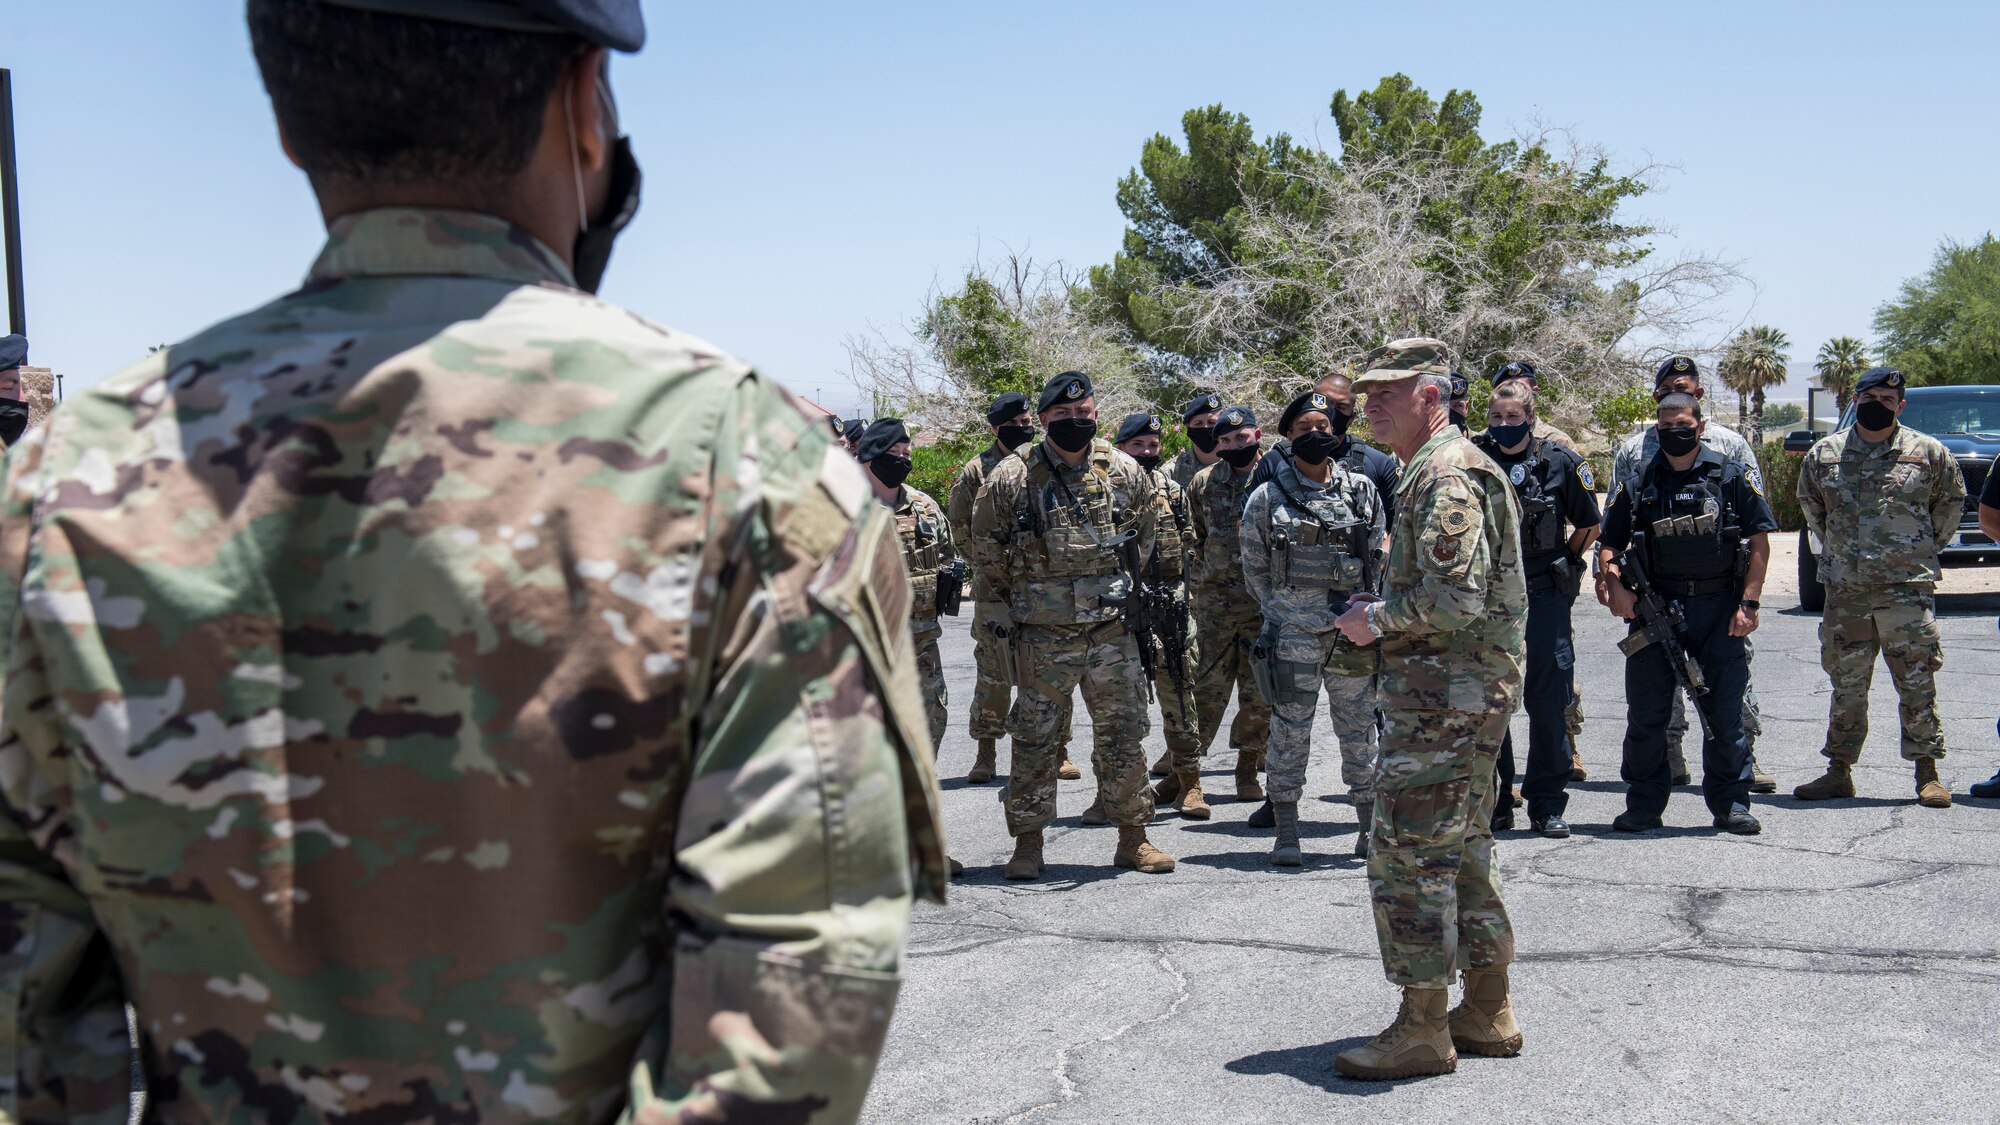 Air Force Chief of Staff Gen. David Goldfein talks to members of the 412th Security Forces Squadron prior to their Guard Mount procedures at Edwards Air Force Base, California, June 17. (Air Force photo by Giancarlo Casem)